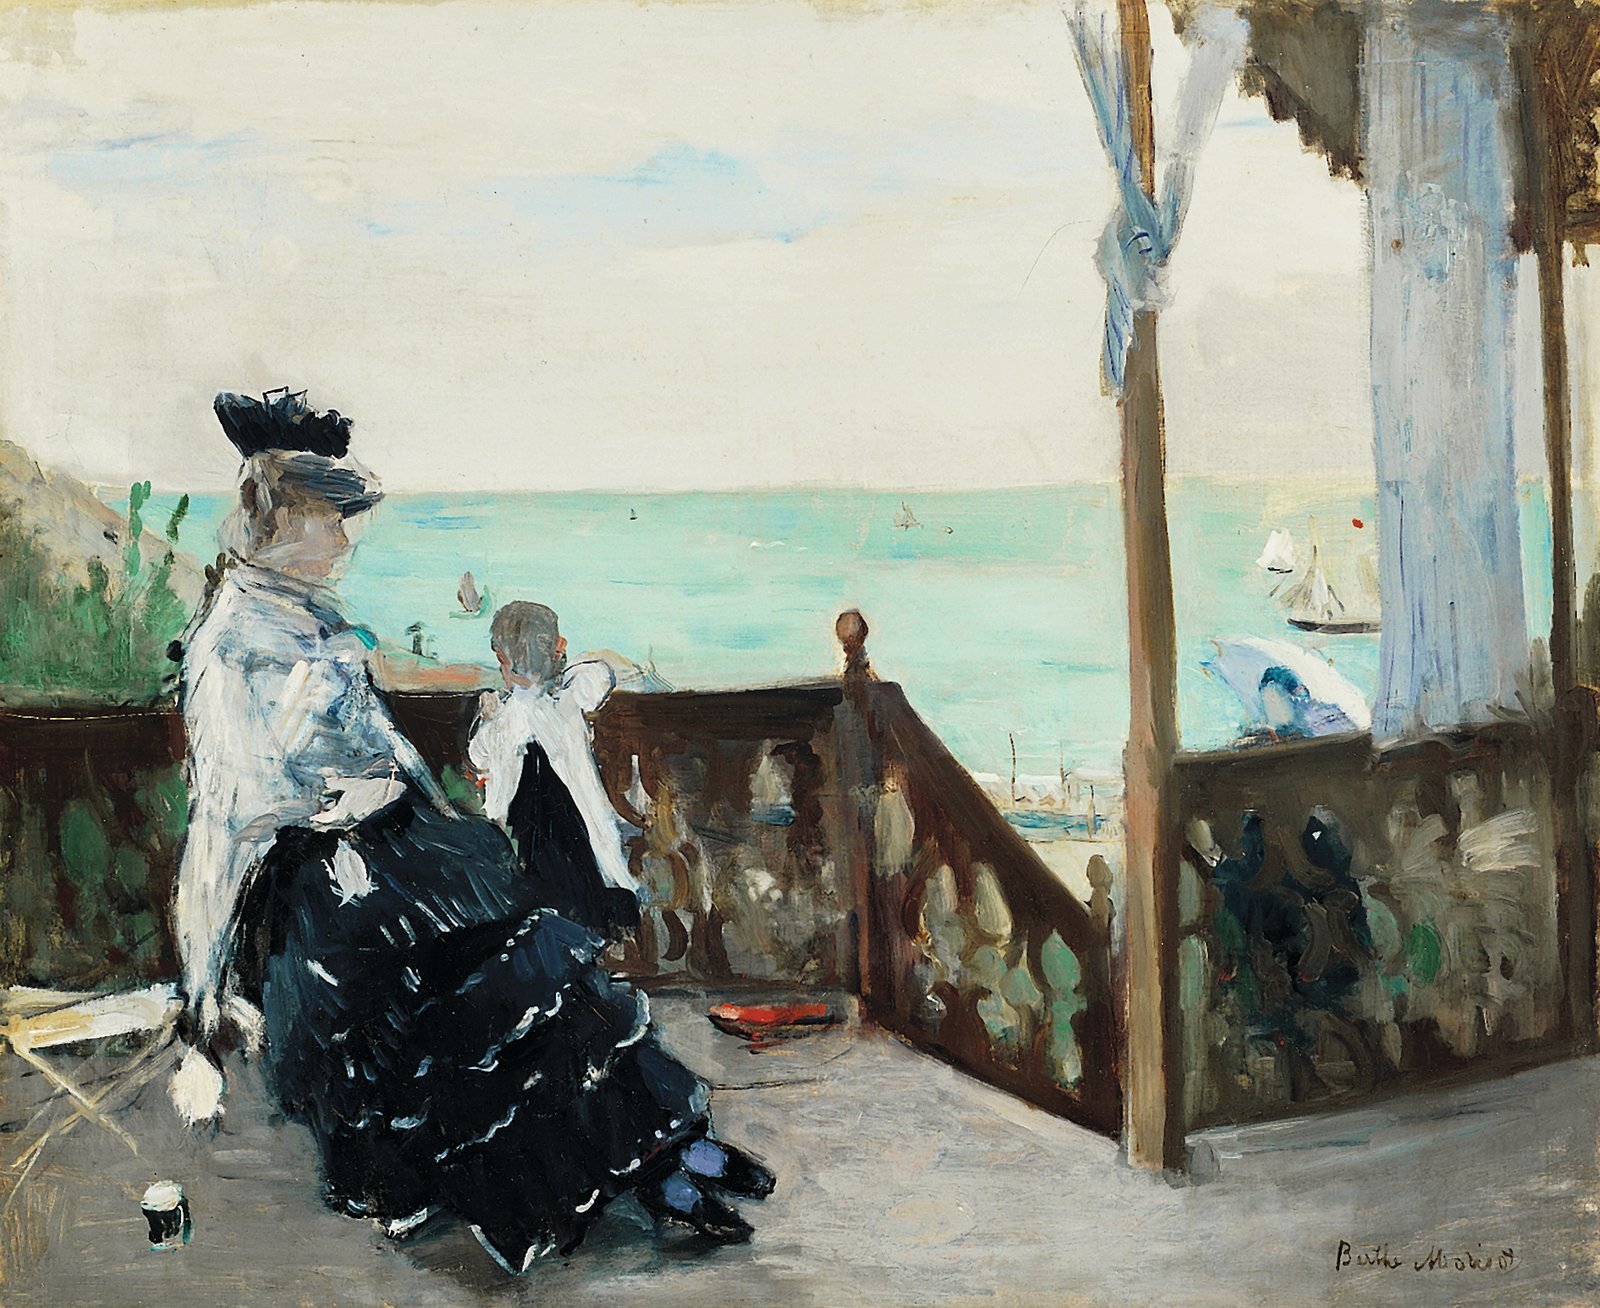 Berthe Morisot (French, 1841-1895), In a Villa at the Seaside, 1874. Oil on Canvas. The Norton Simon Art Foundation © Norton Simon Art Foundation